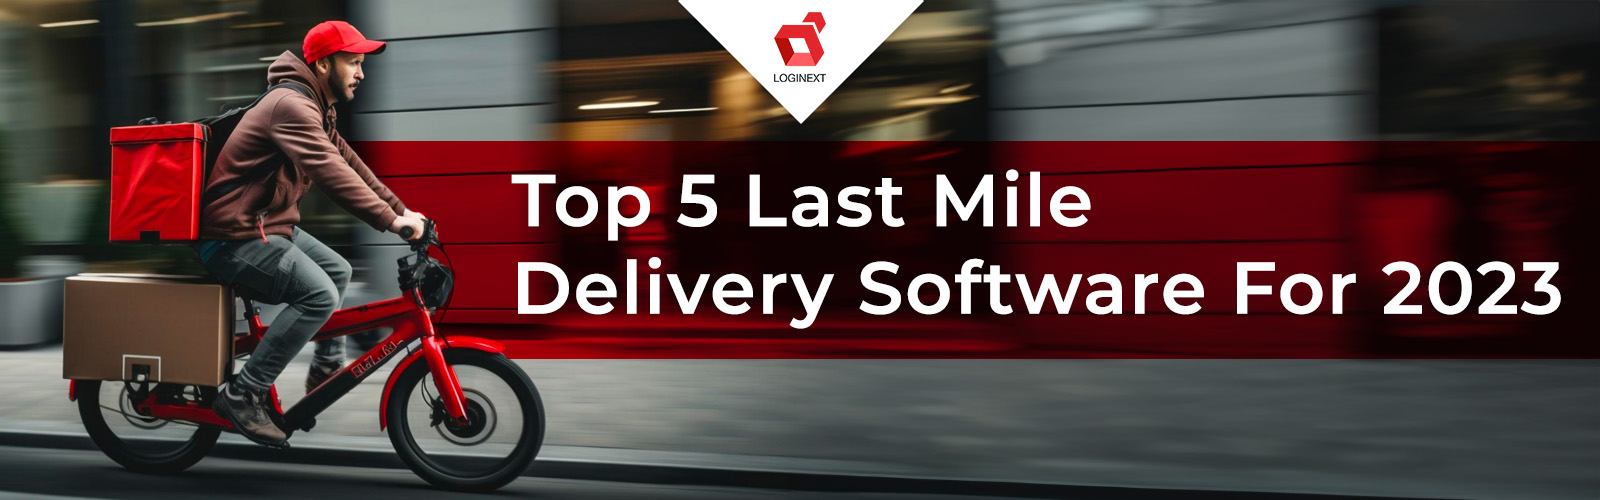 Topp 5 Last Mile Delivery Software